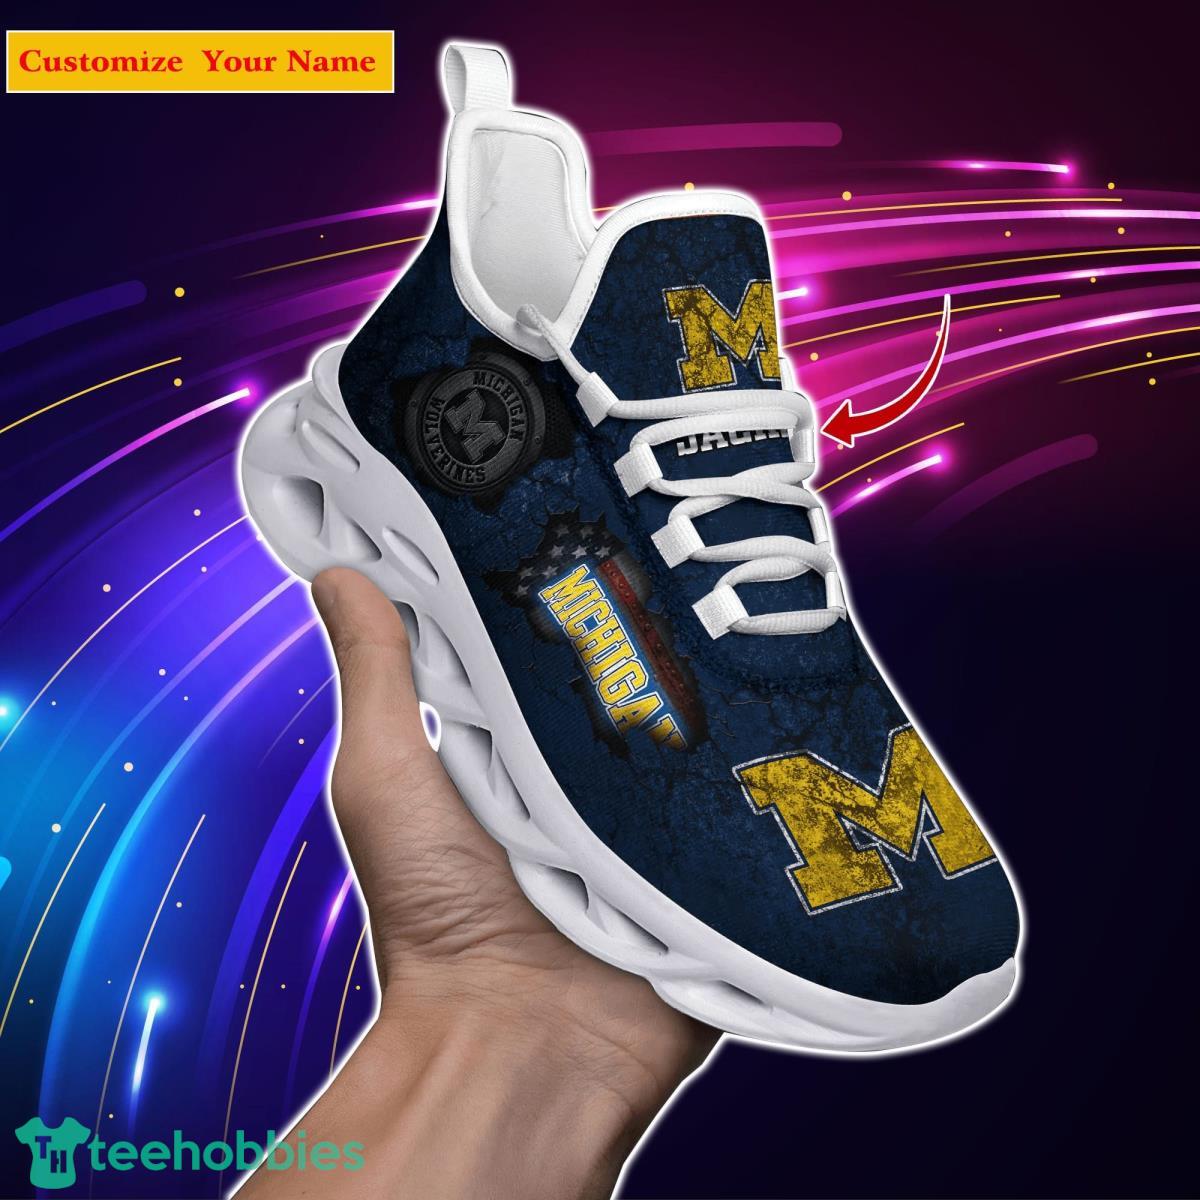 Michigan Wolverines NCAA2 Custom Name Max Soul Shoes Great Gift For Men Women Fans Product Photo 1